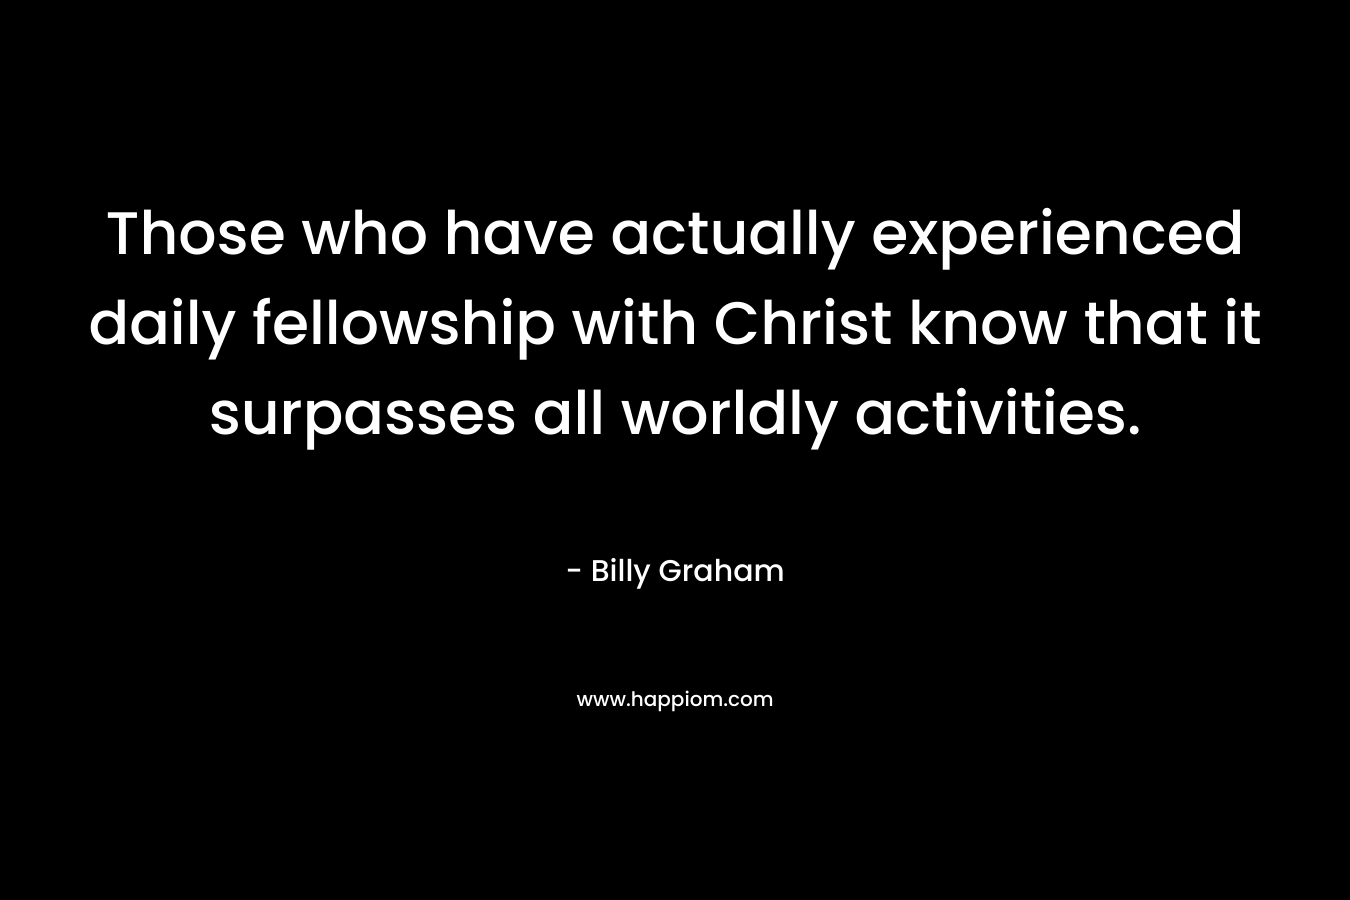 Those who have actually experienced daily fellowship with Christ know that it surpasses all worldly activities. – Billy Graham